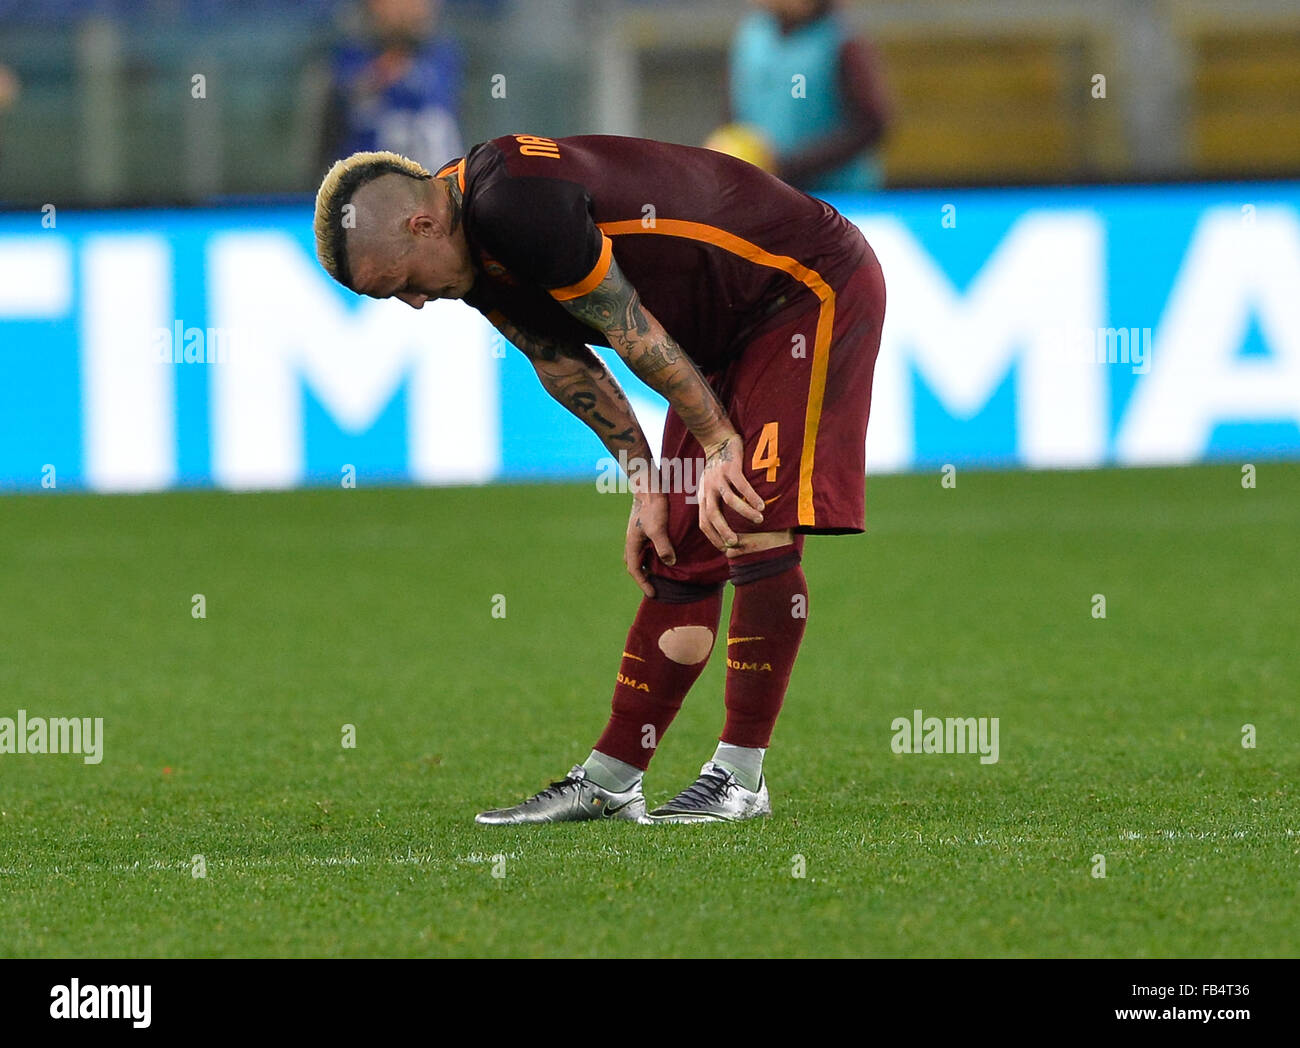 Rome, Italy. 09th Jan, 2016. Radja Nainggolan during the Italian Serie A football match A.S. Roma vs A.C. Milan at the Olympic Stadium in Rome, on january 09, 2016 Credit:  Silvia Lore'/Alamy Live News Stock Photo